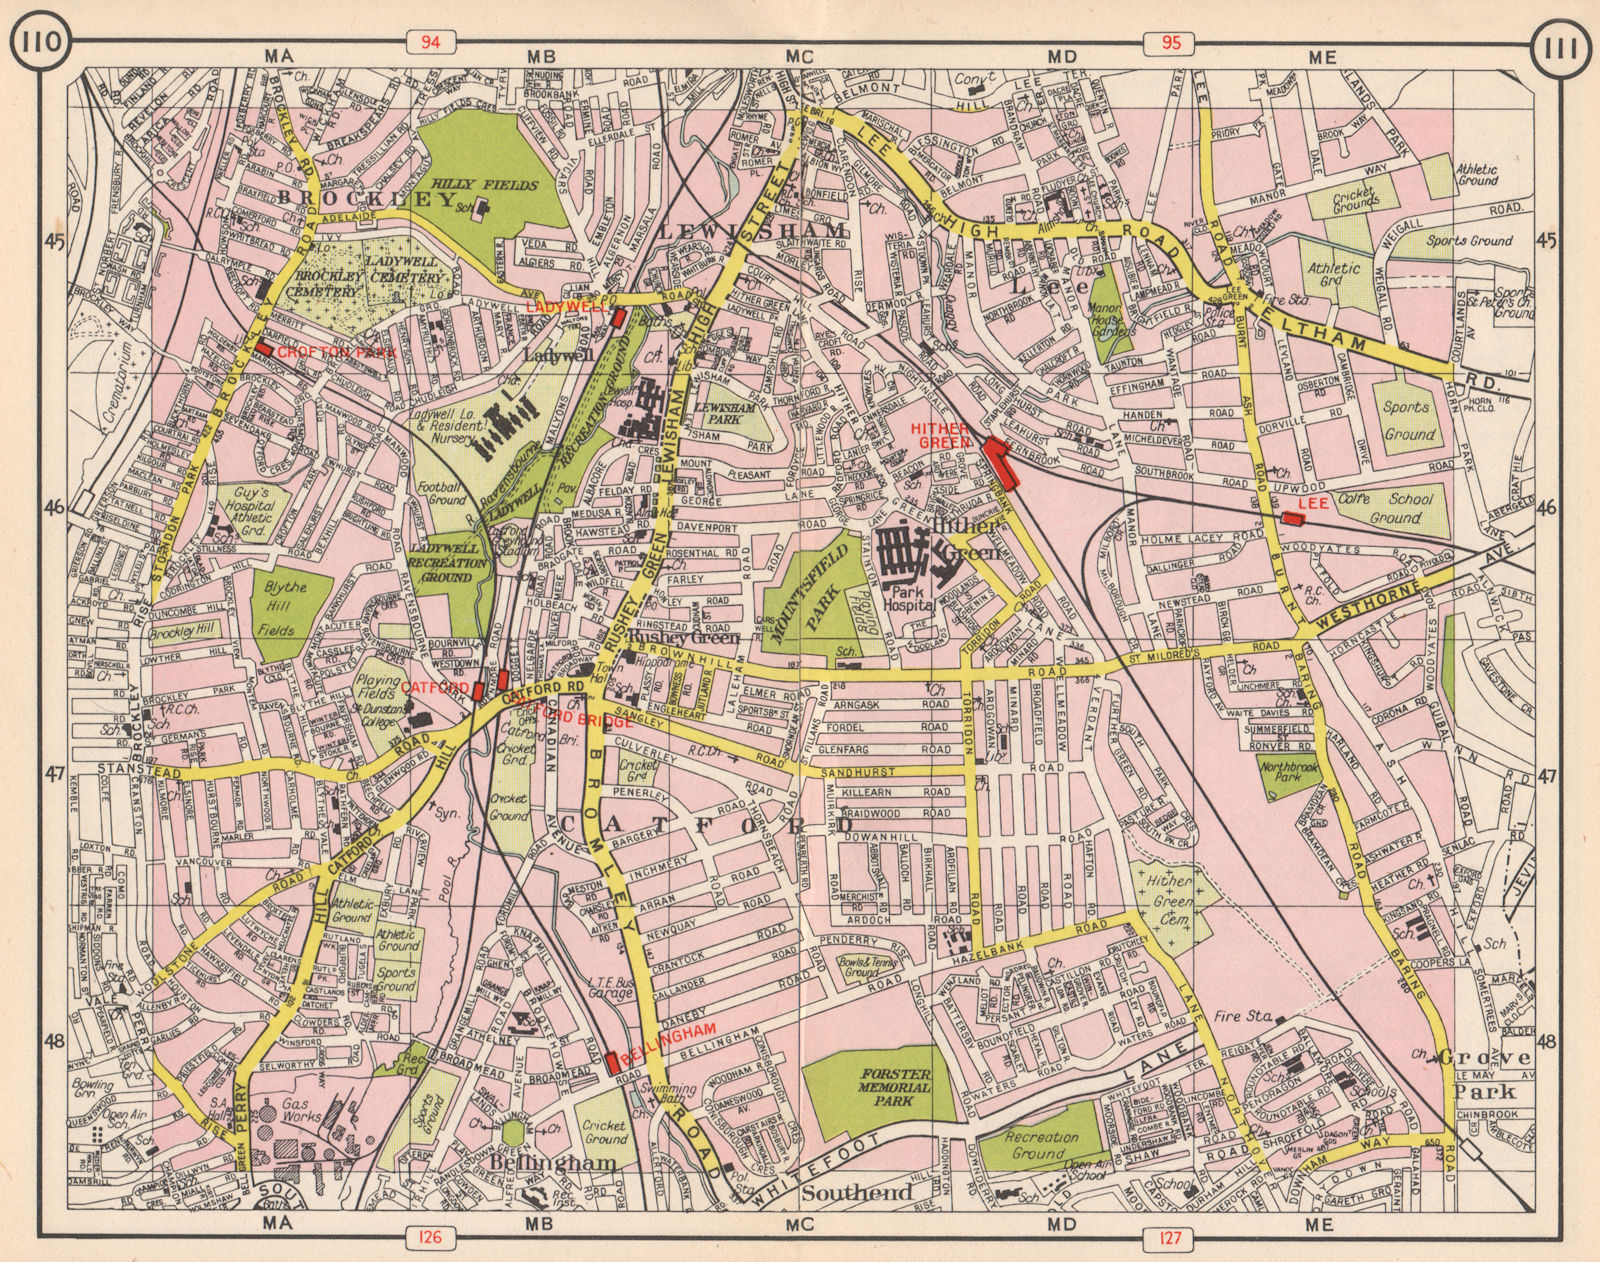 SE LONDON. Catford Bellingham Hither Green Lewisham Lee Ladywell 1953 old map